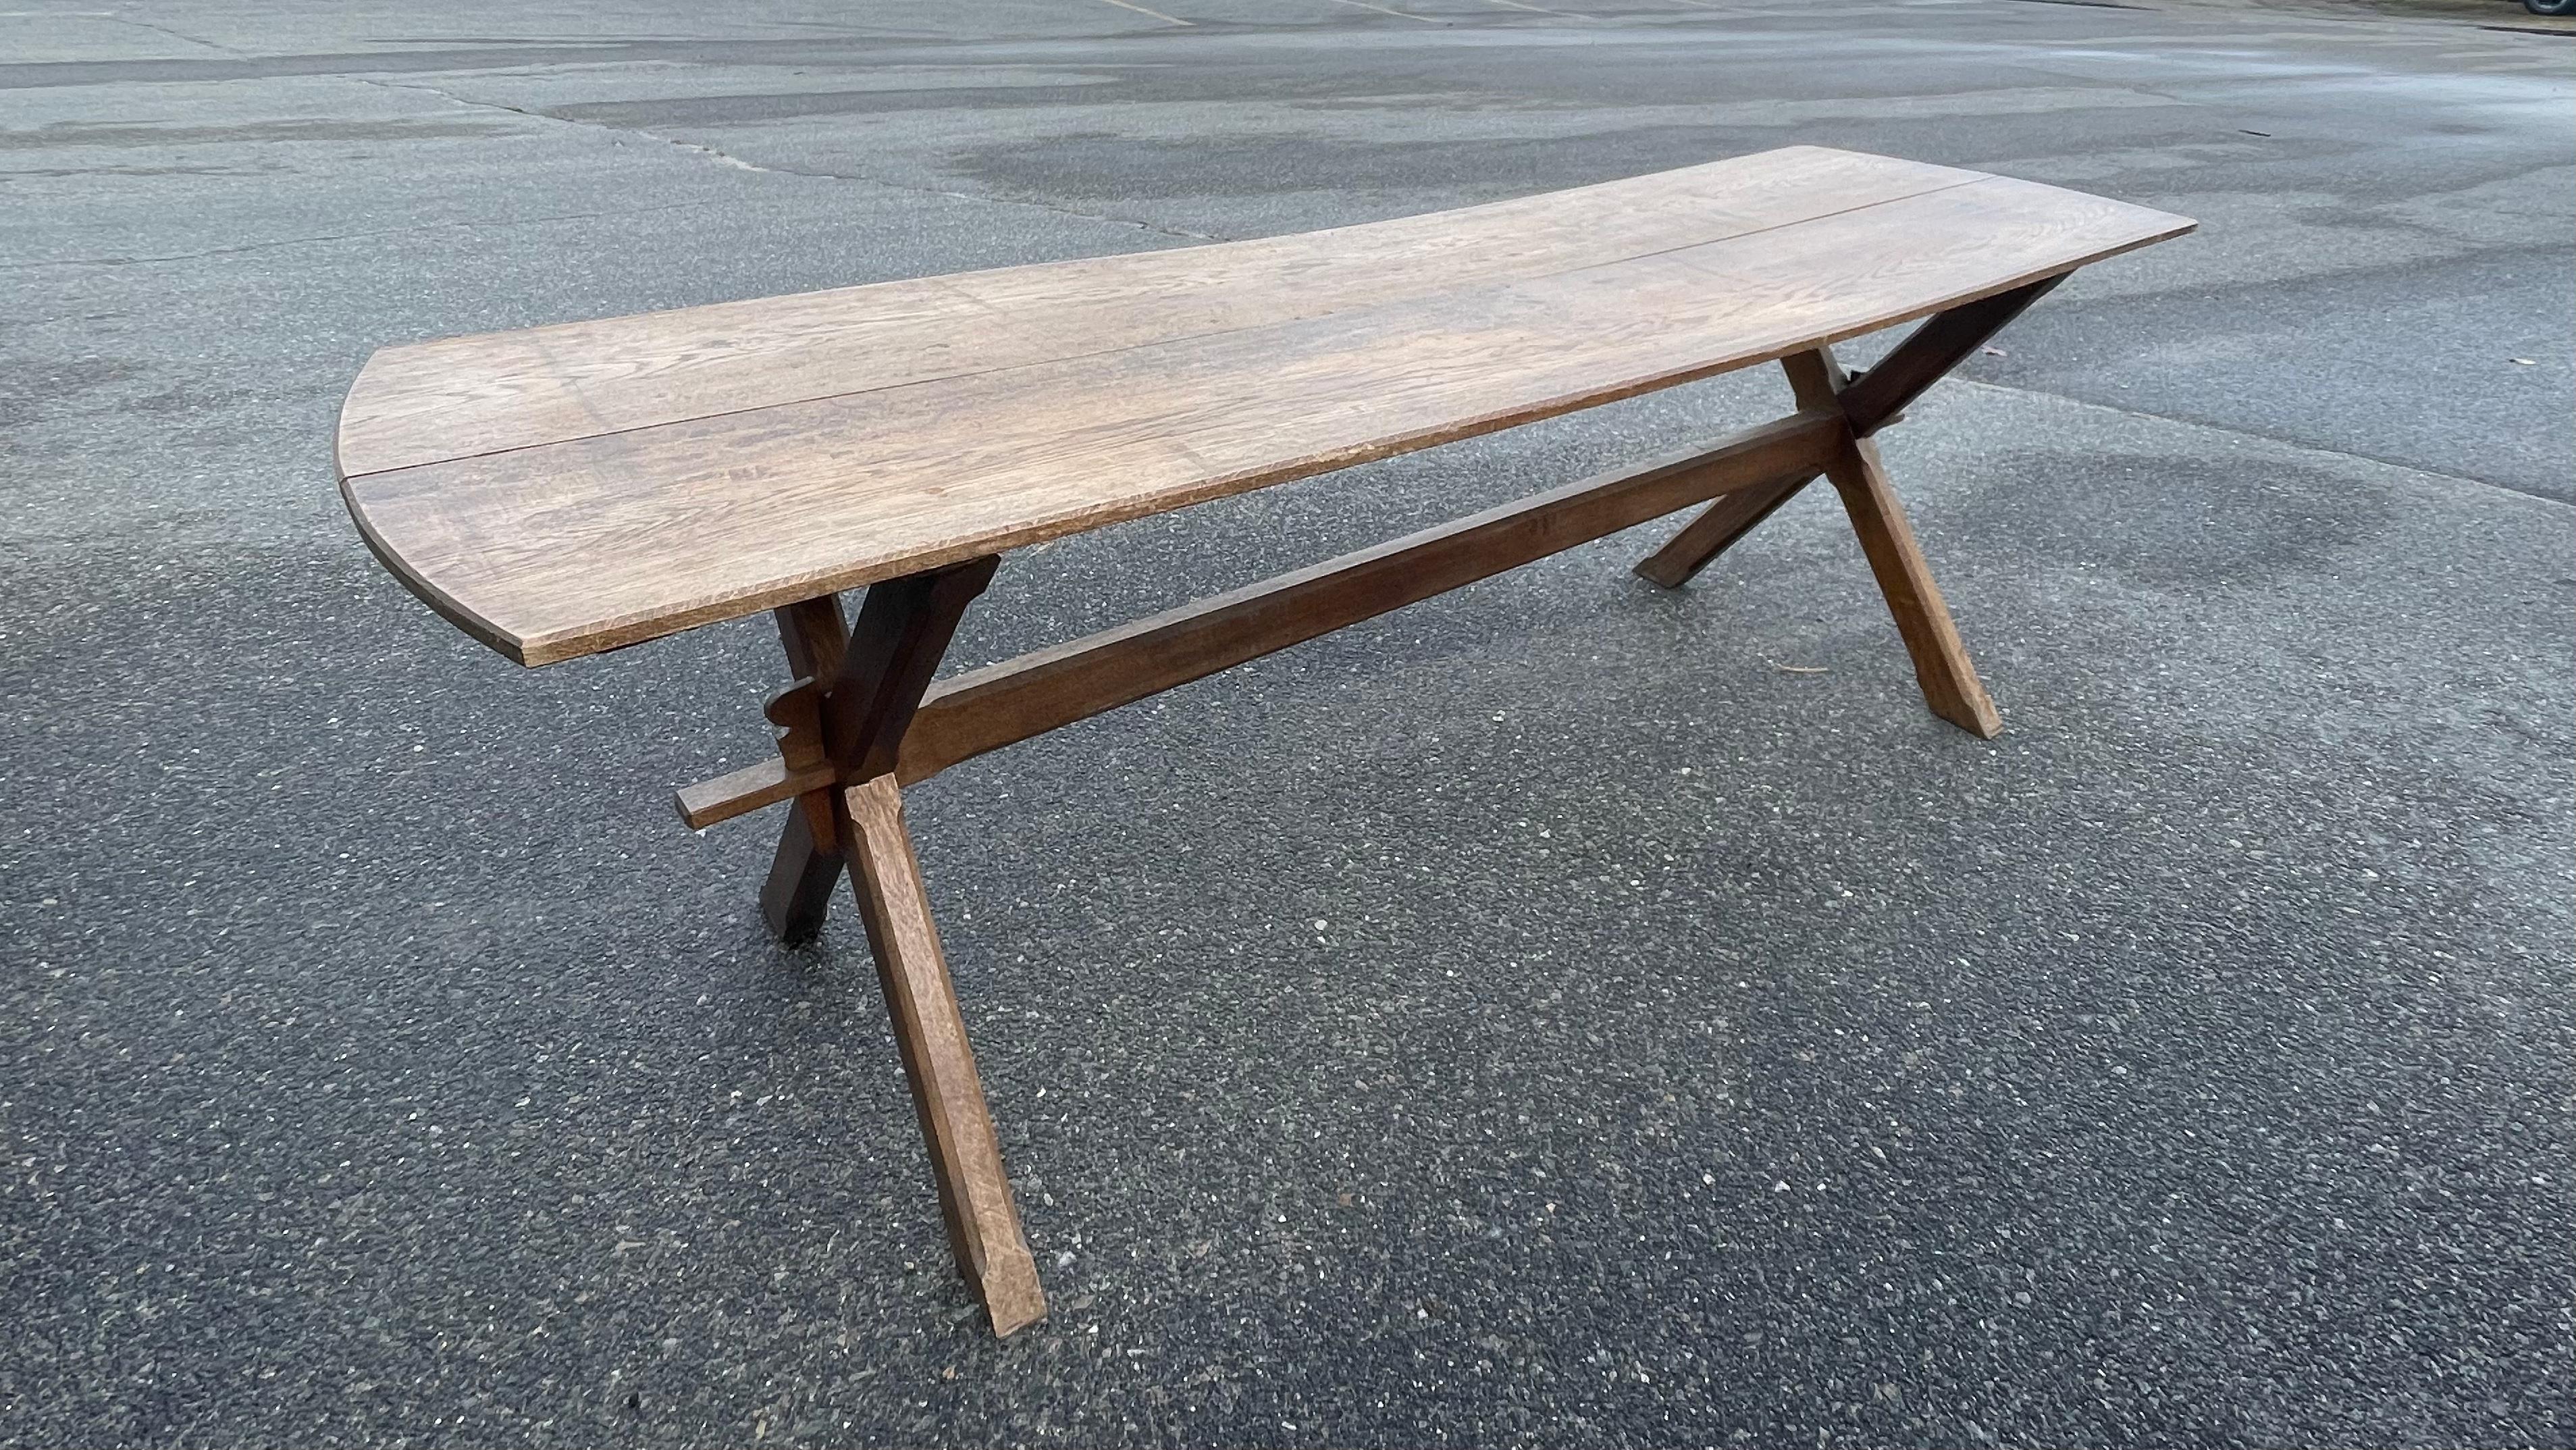 Lovely oak trestle table with antique two board top (one board with small old patch) and slightly curved ends.  X legs connected with single stretcher and all-over mellow patina.  The shallow depth of this piece makes it great for use as a console